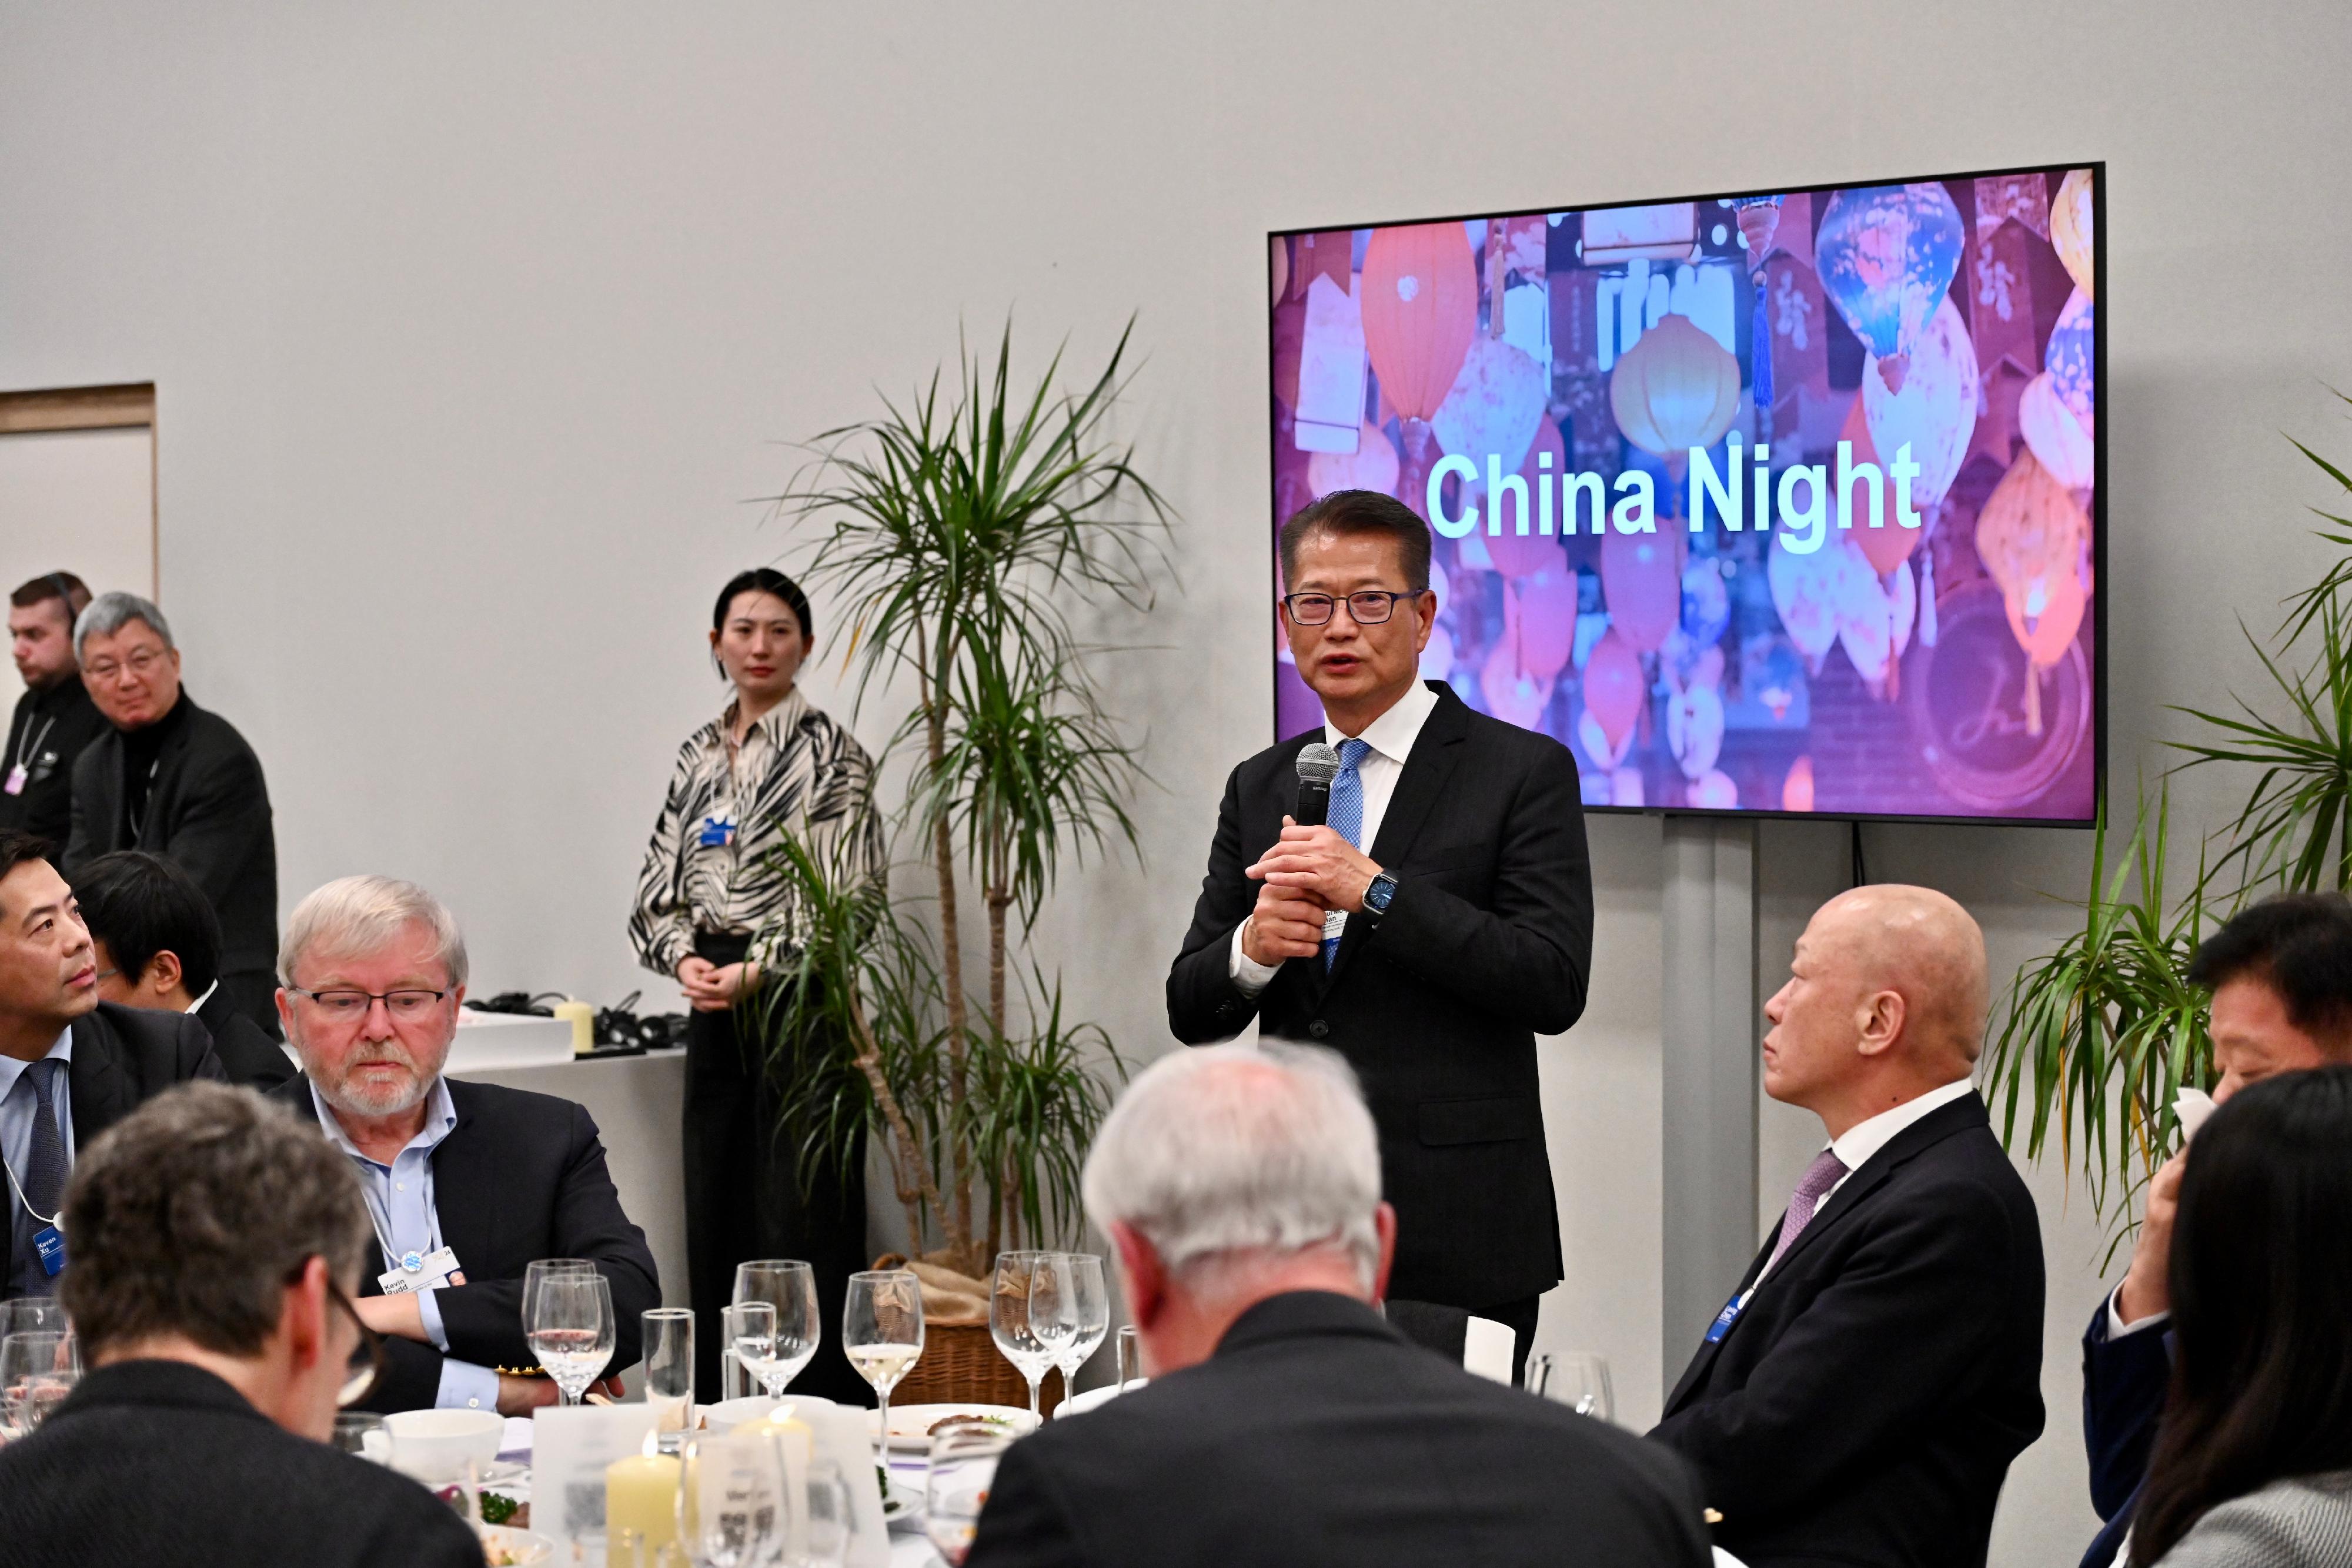 The Financial Secretary, Mr Paul Chan, continued to attend the World Economic Forum (WEF) Annual Meeting at Davos, Switzerland, yesterday (January 17, Davos time). Photo shows Mr Chan speaking at the "China Night" dinner organised by the WEF.